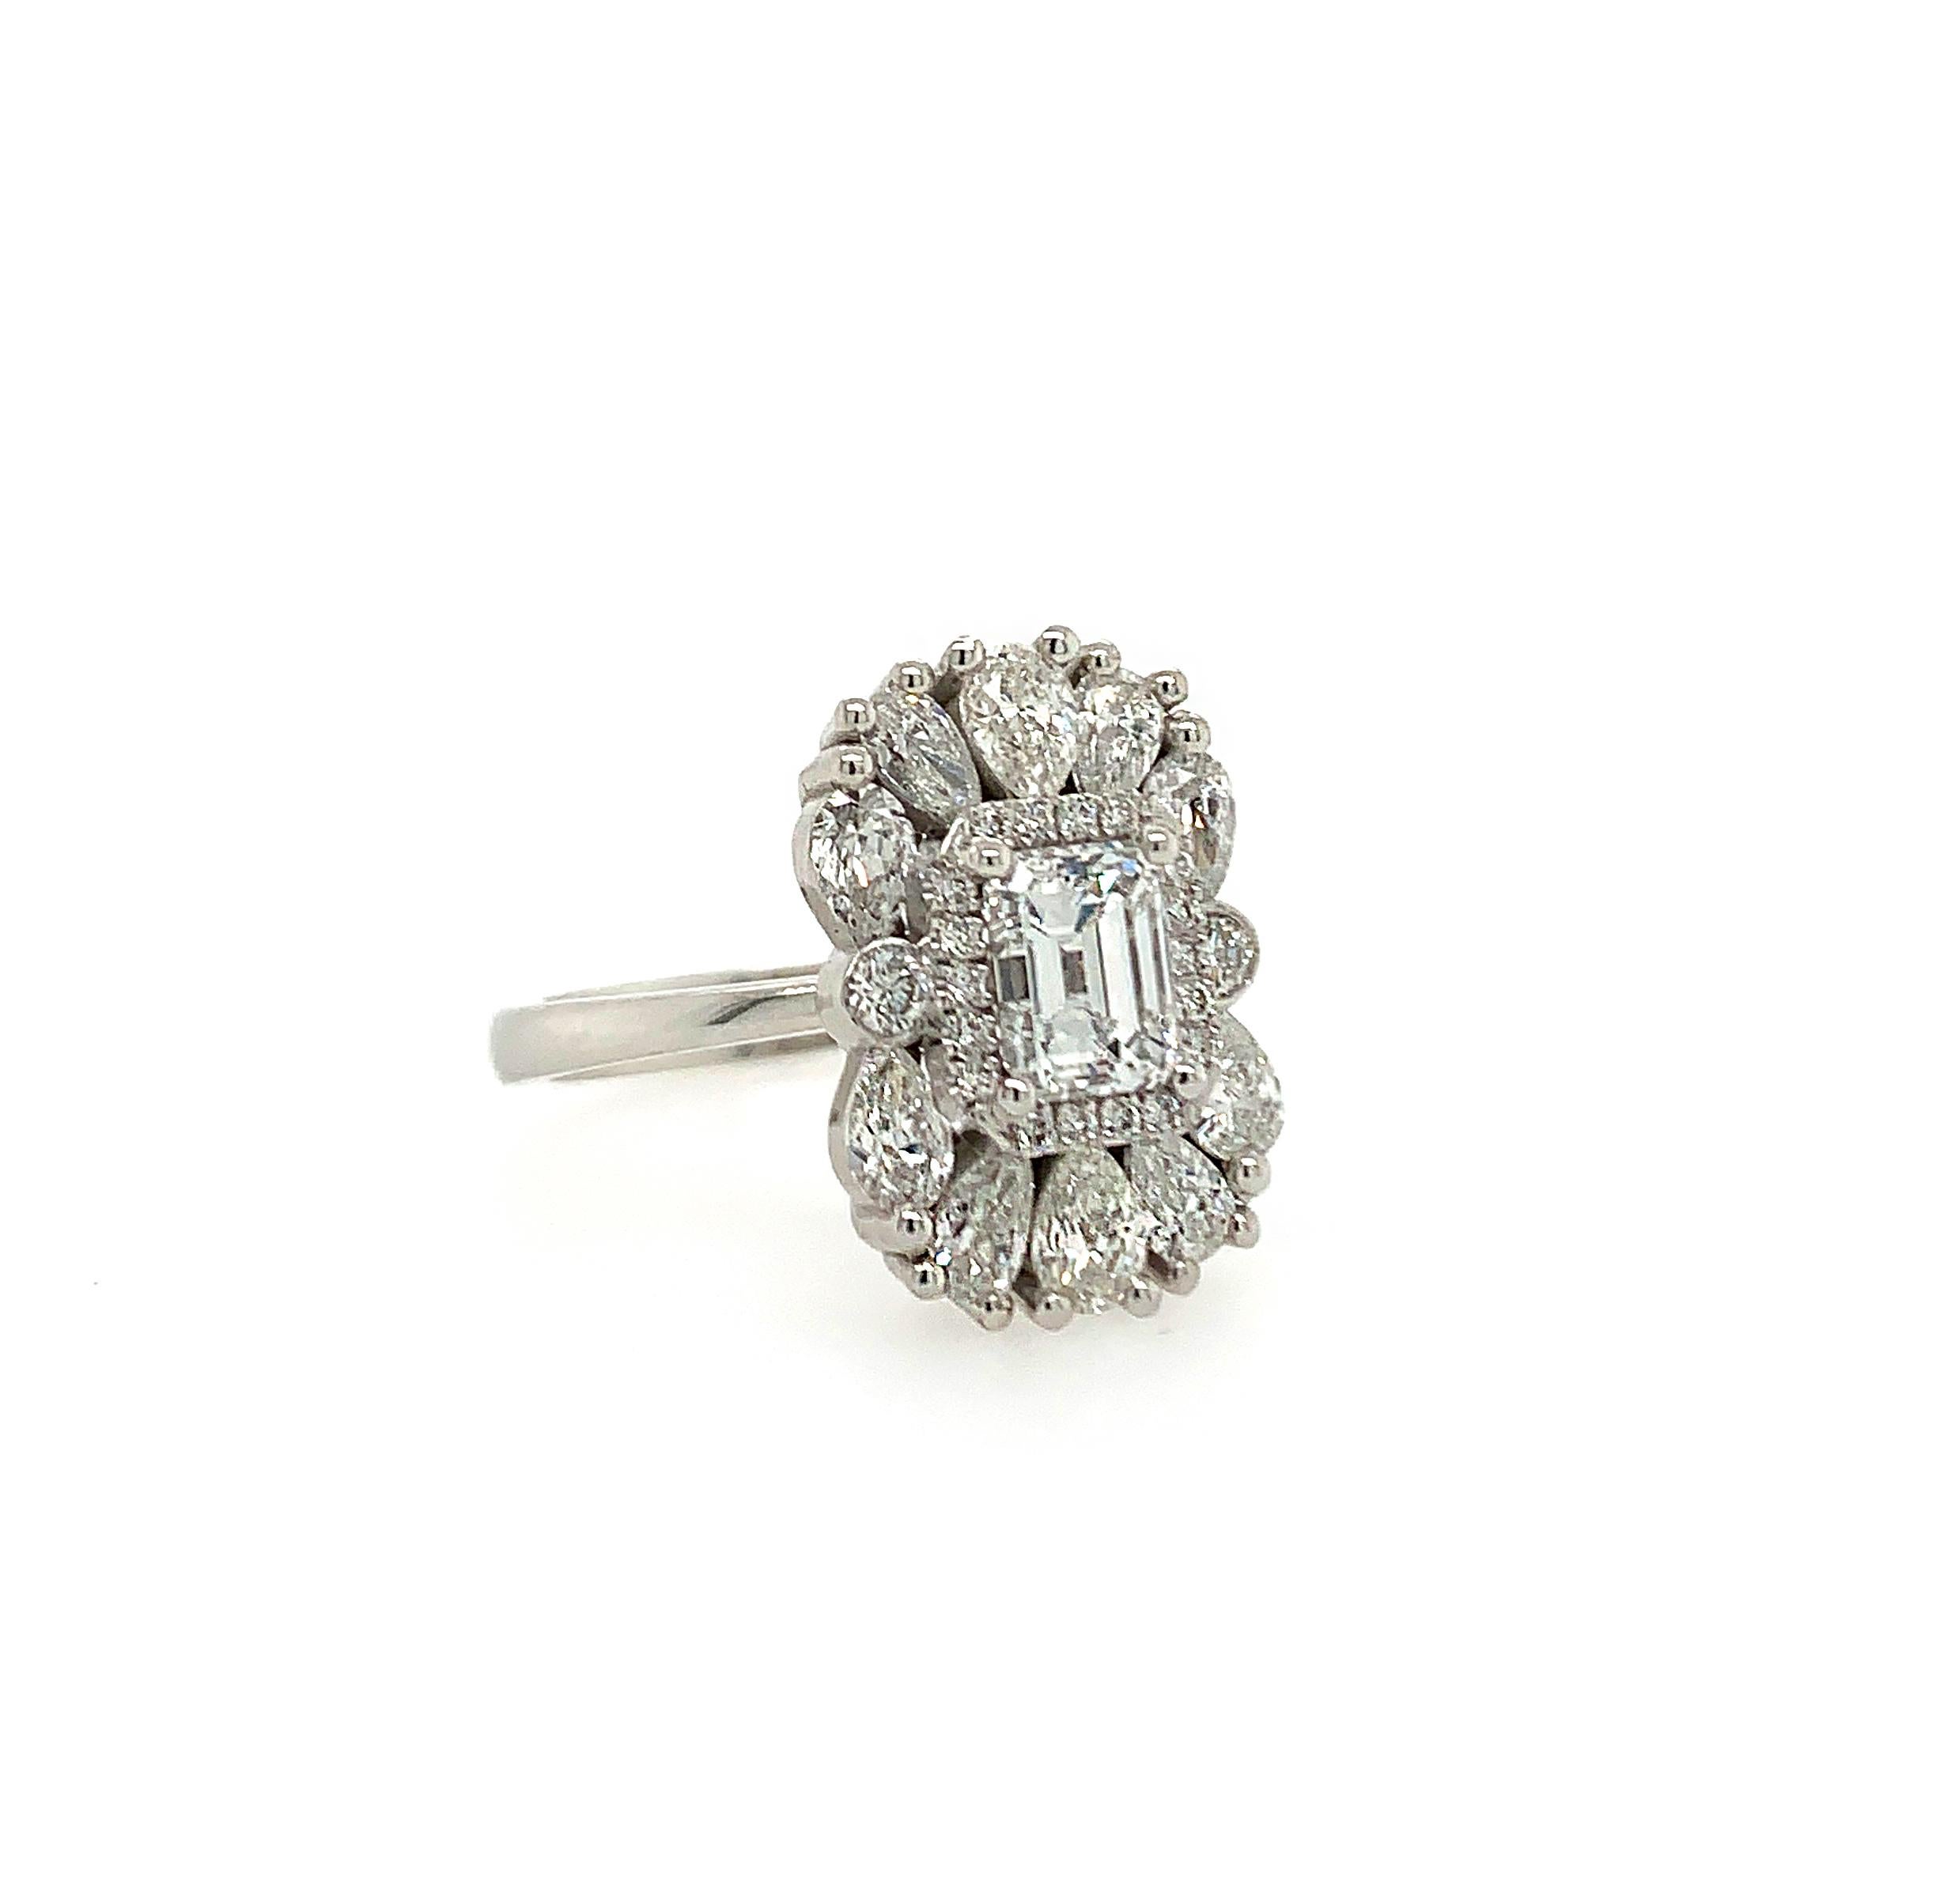 This beautiful ring flaunts a 0.85 carat emerald-cut natural white diamond surrounded by a diamond halo and set atop a bed of 10 pear-shaped white diamonds and 2 bezel set round brilliants. The tapered white gold shank adds a touch of elegance to